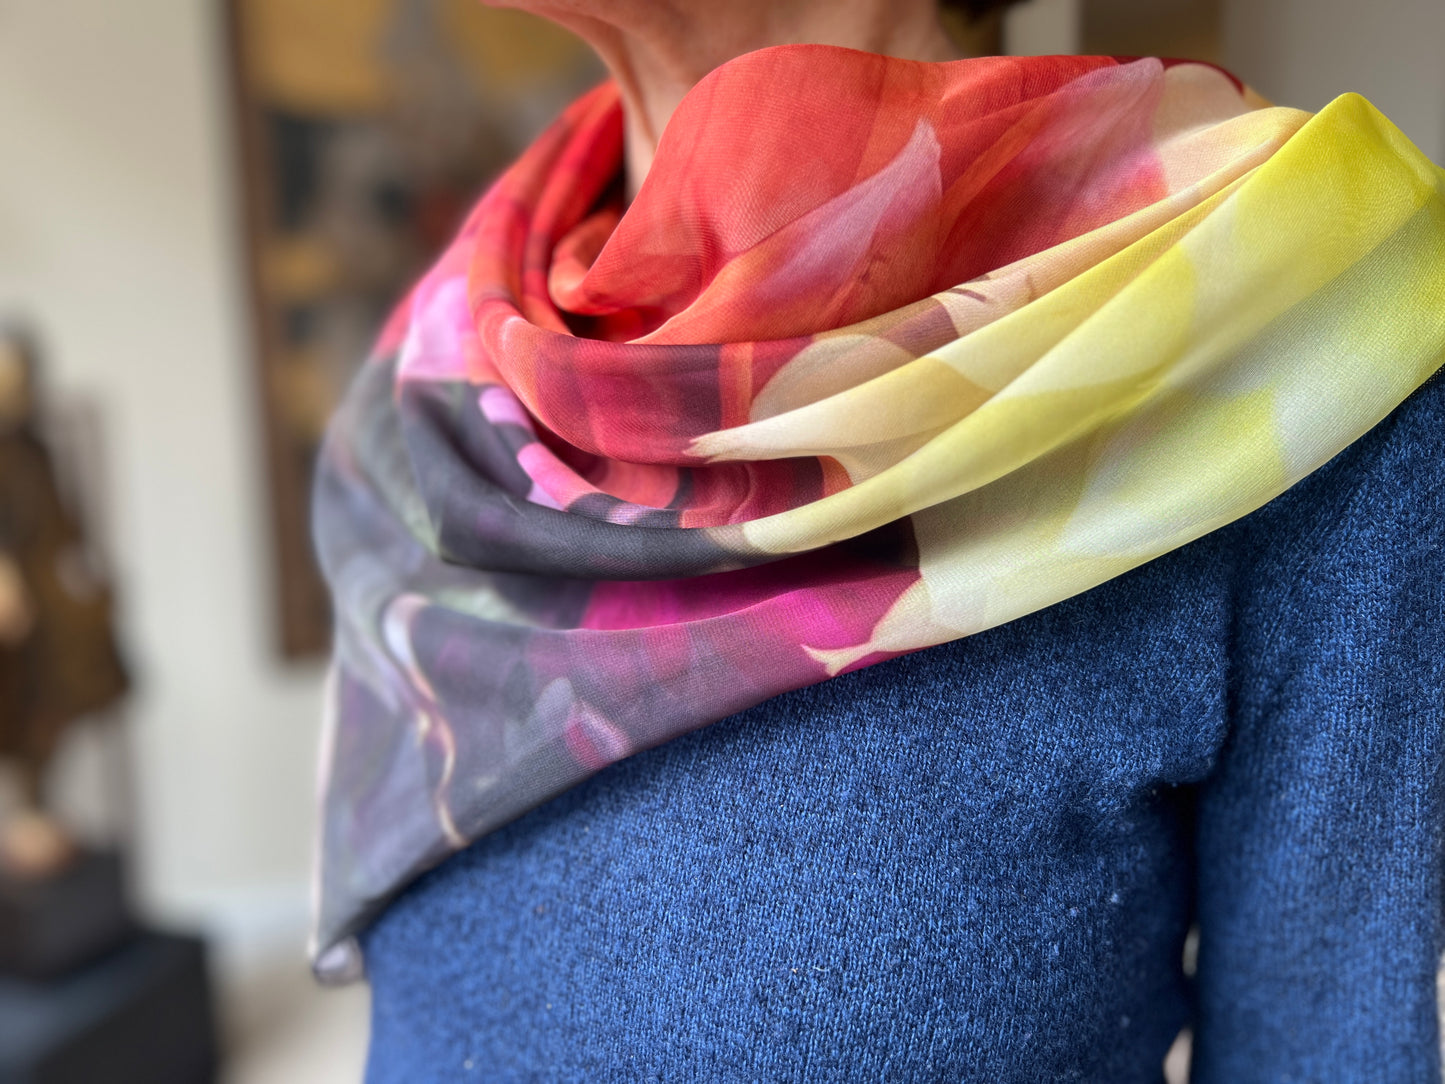 'Beauty in the Midst of Chaos' Floral Scarf Collection "The Bouquet"